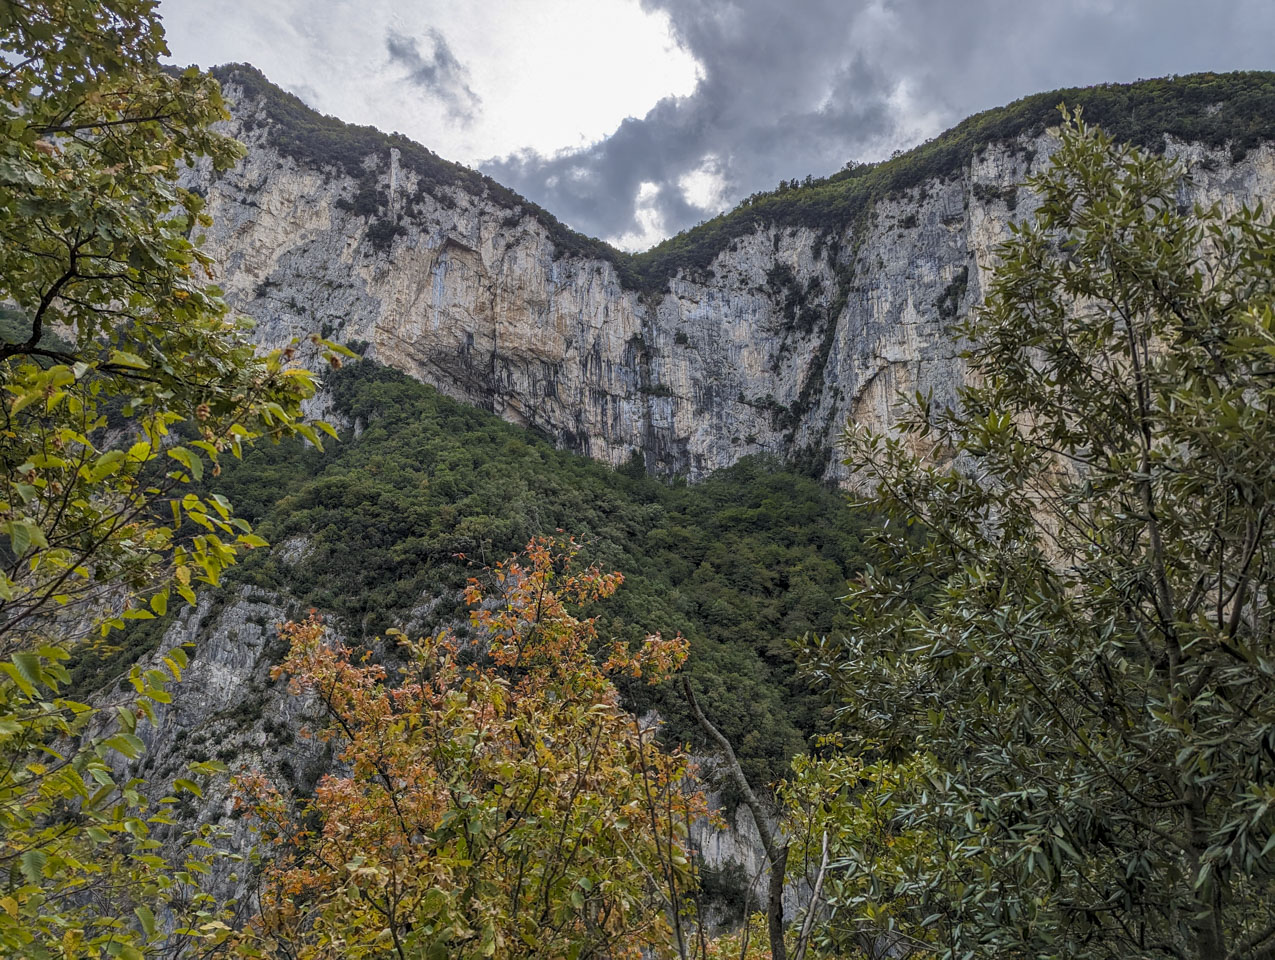 Sheer cliff walls in Frassasi Gorge, Italy